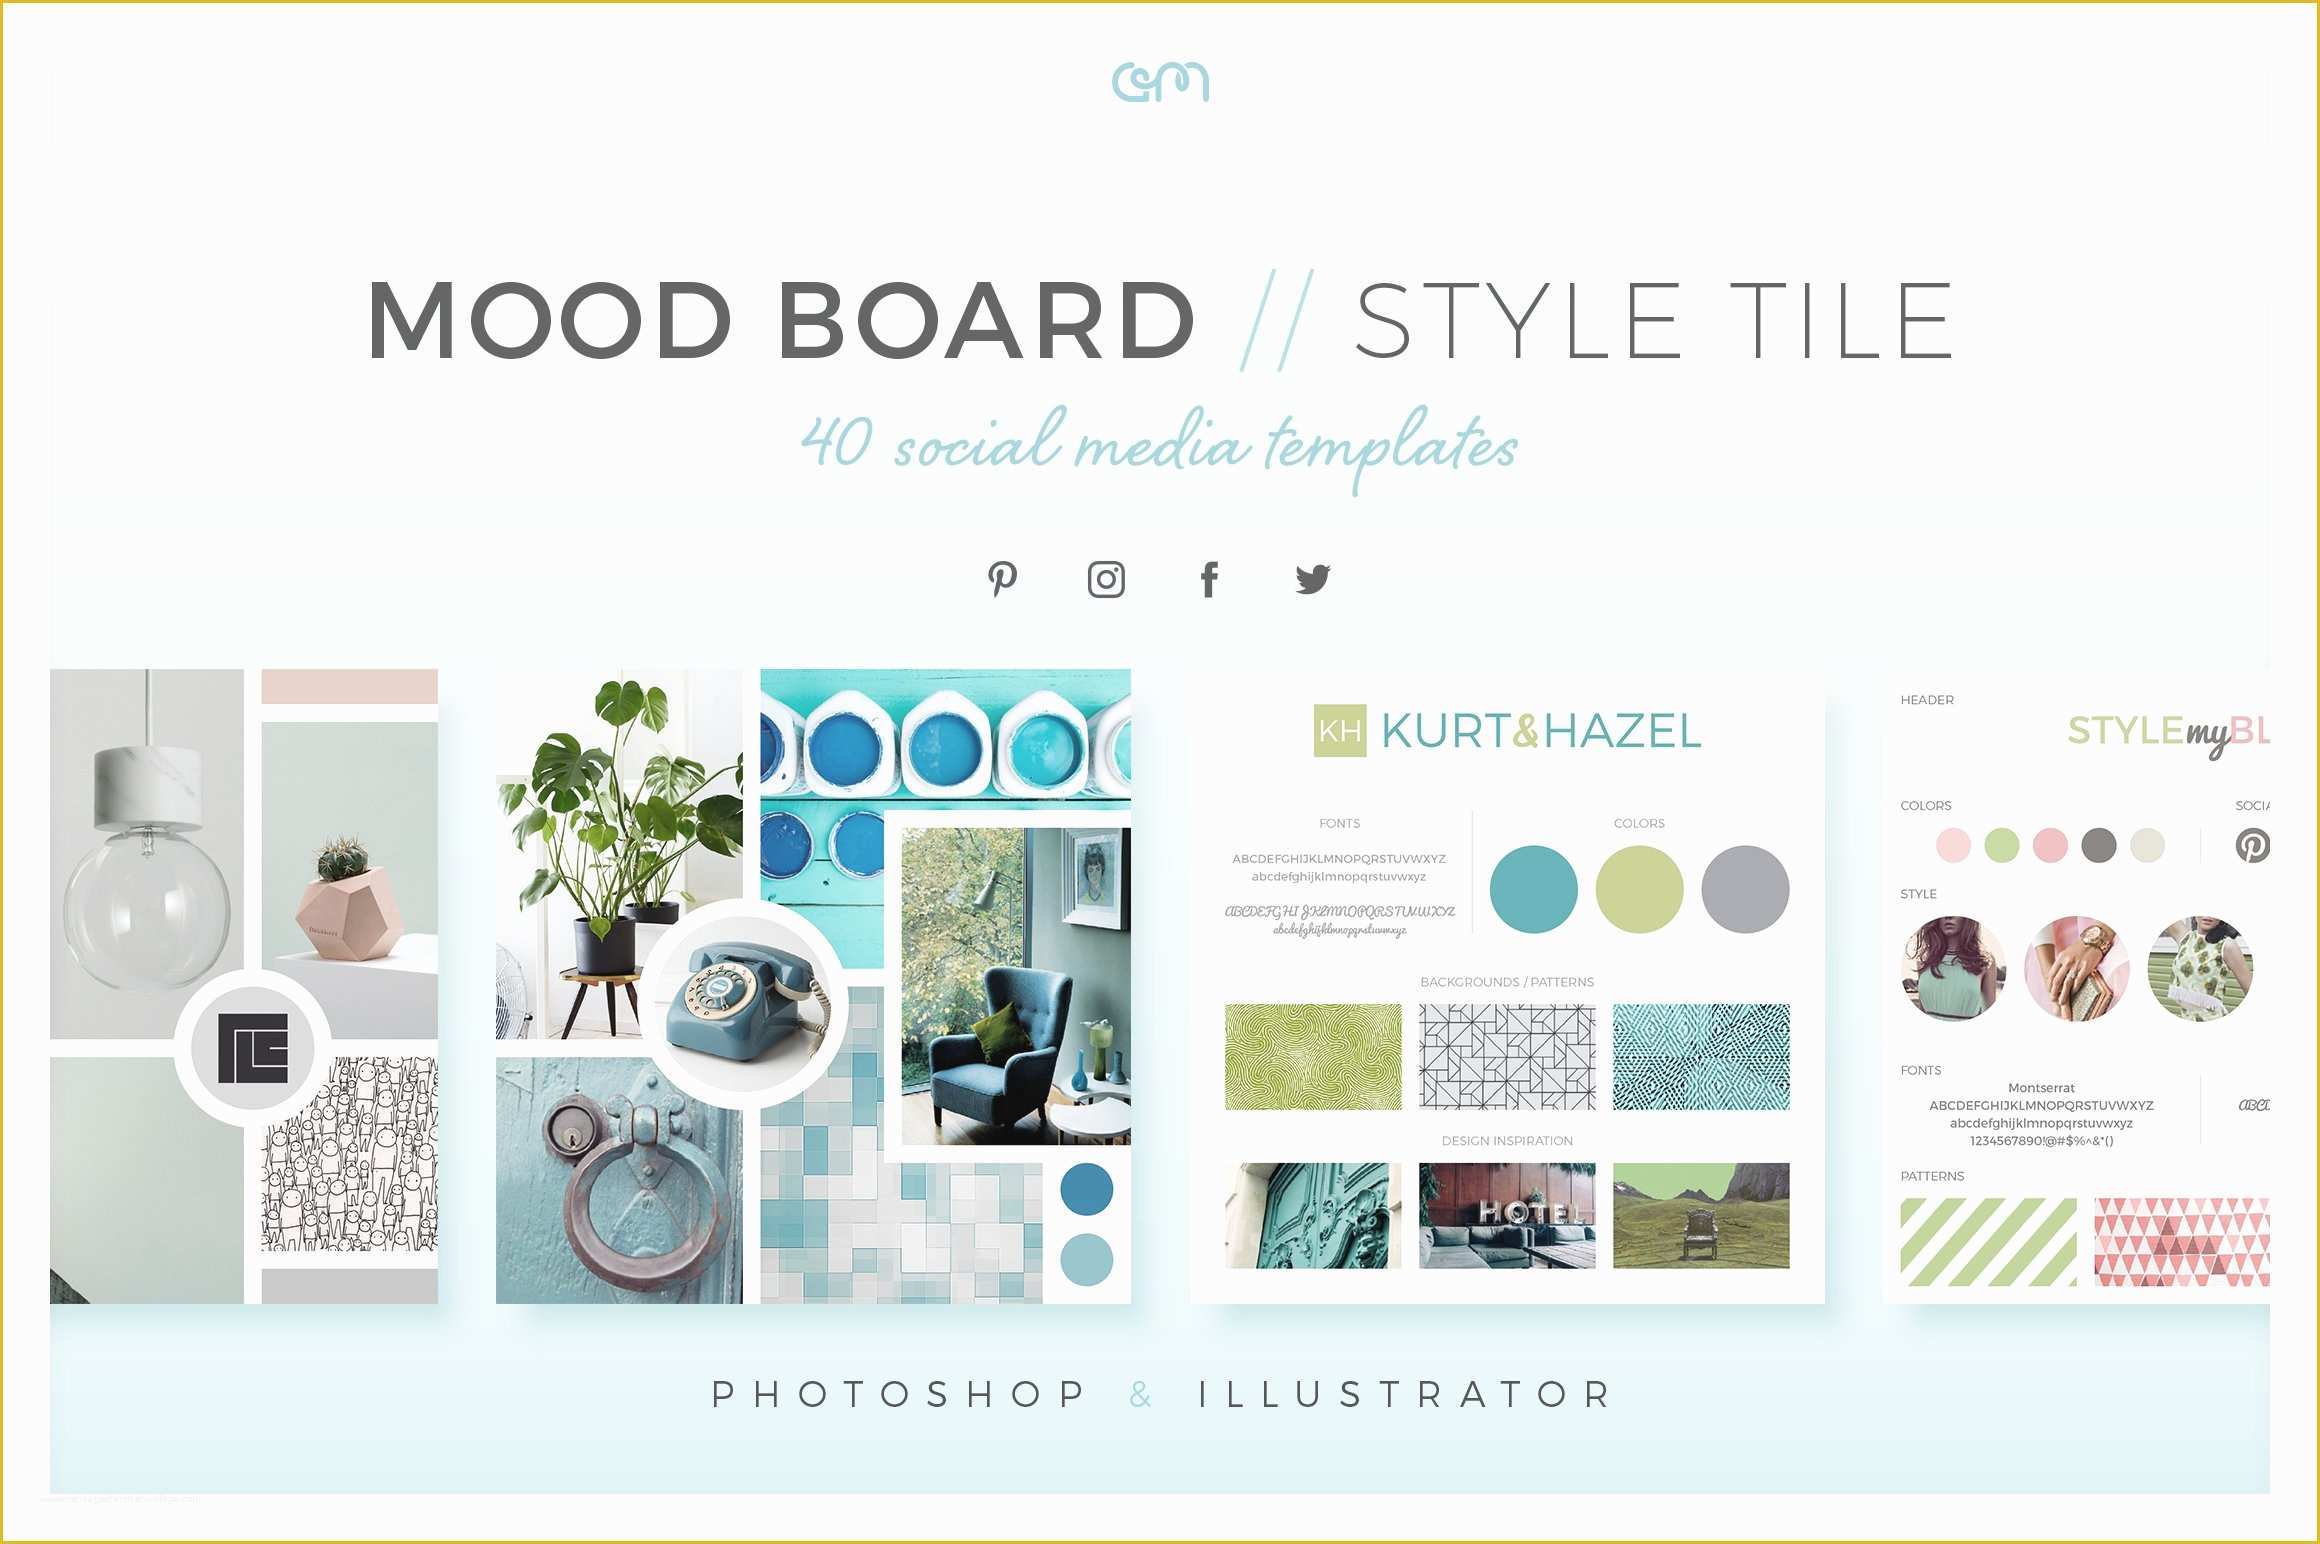 Free Moodboard Template Illustrator Of Mood Board Style Tile Pack Social Media Templates Of Free Moodboard Template Illustrator 